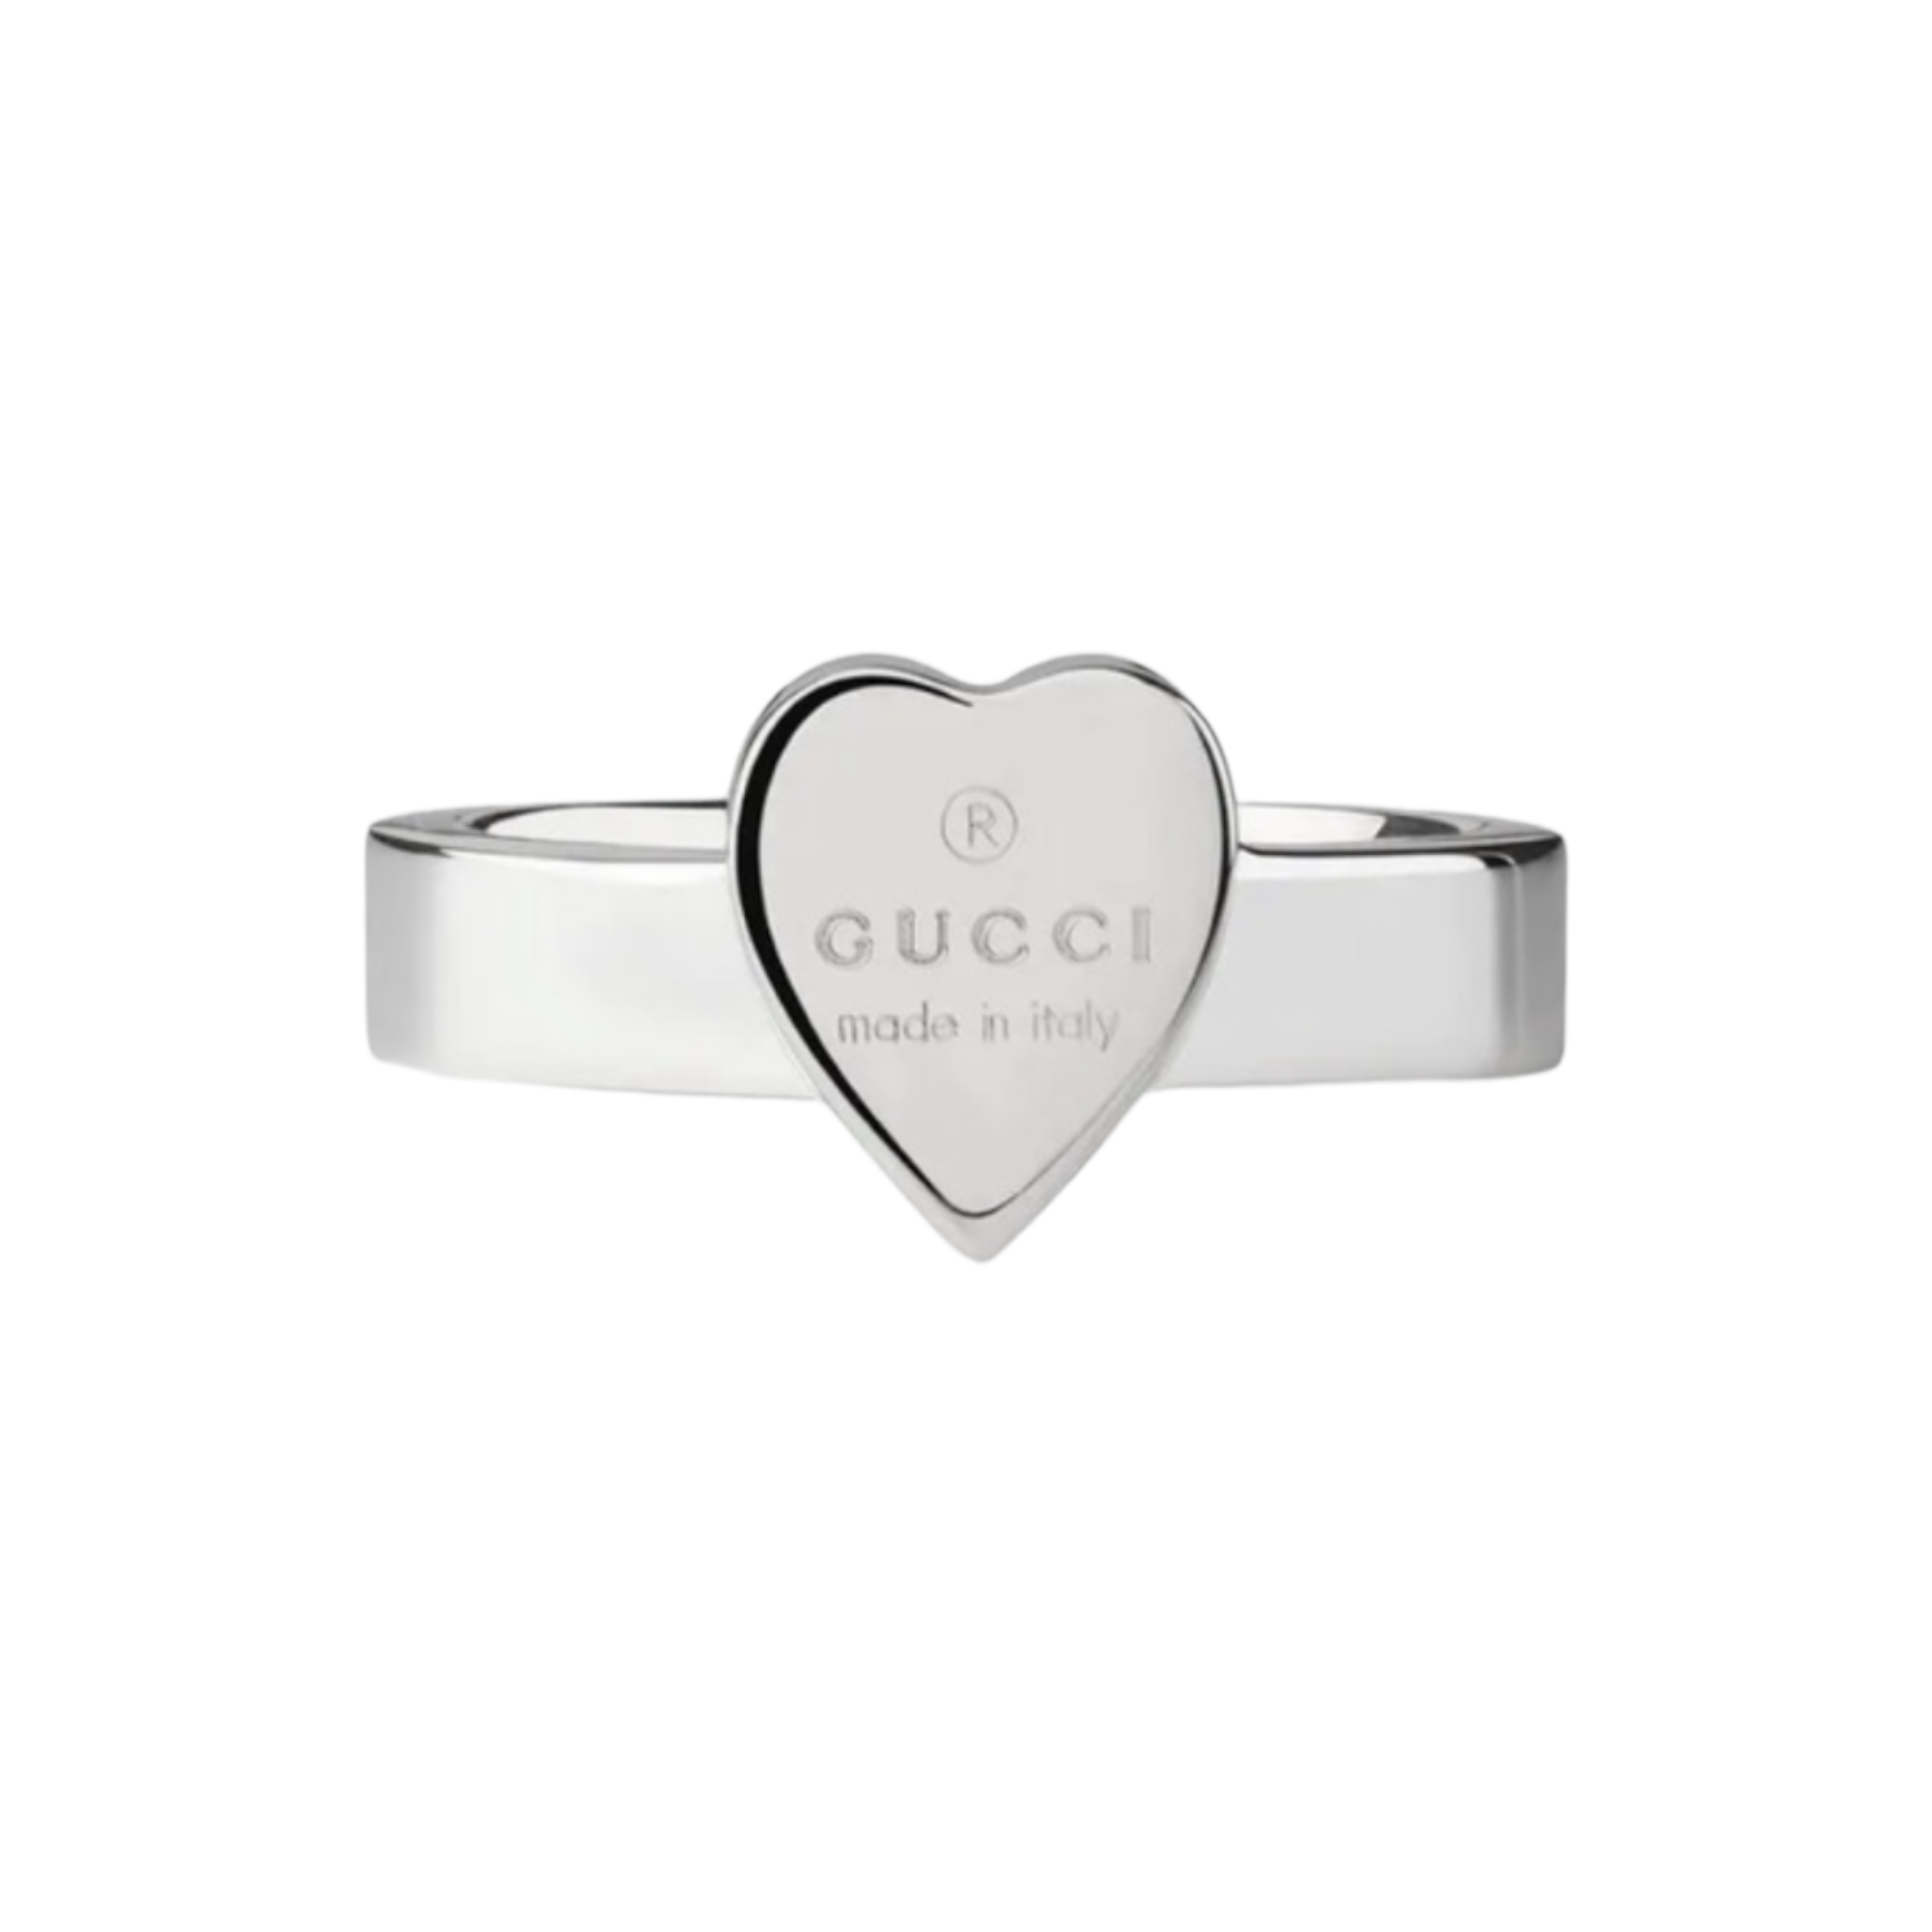 GUCCI Sterling Silver Trademark ring with heart pendant  | Size: GUCCI: 16/ US 7.5 |